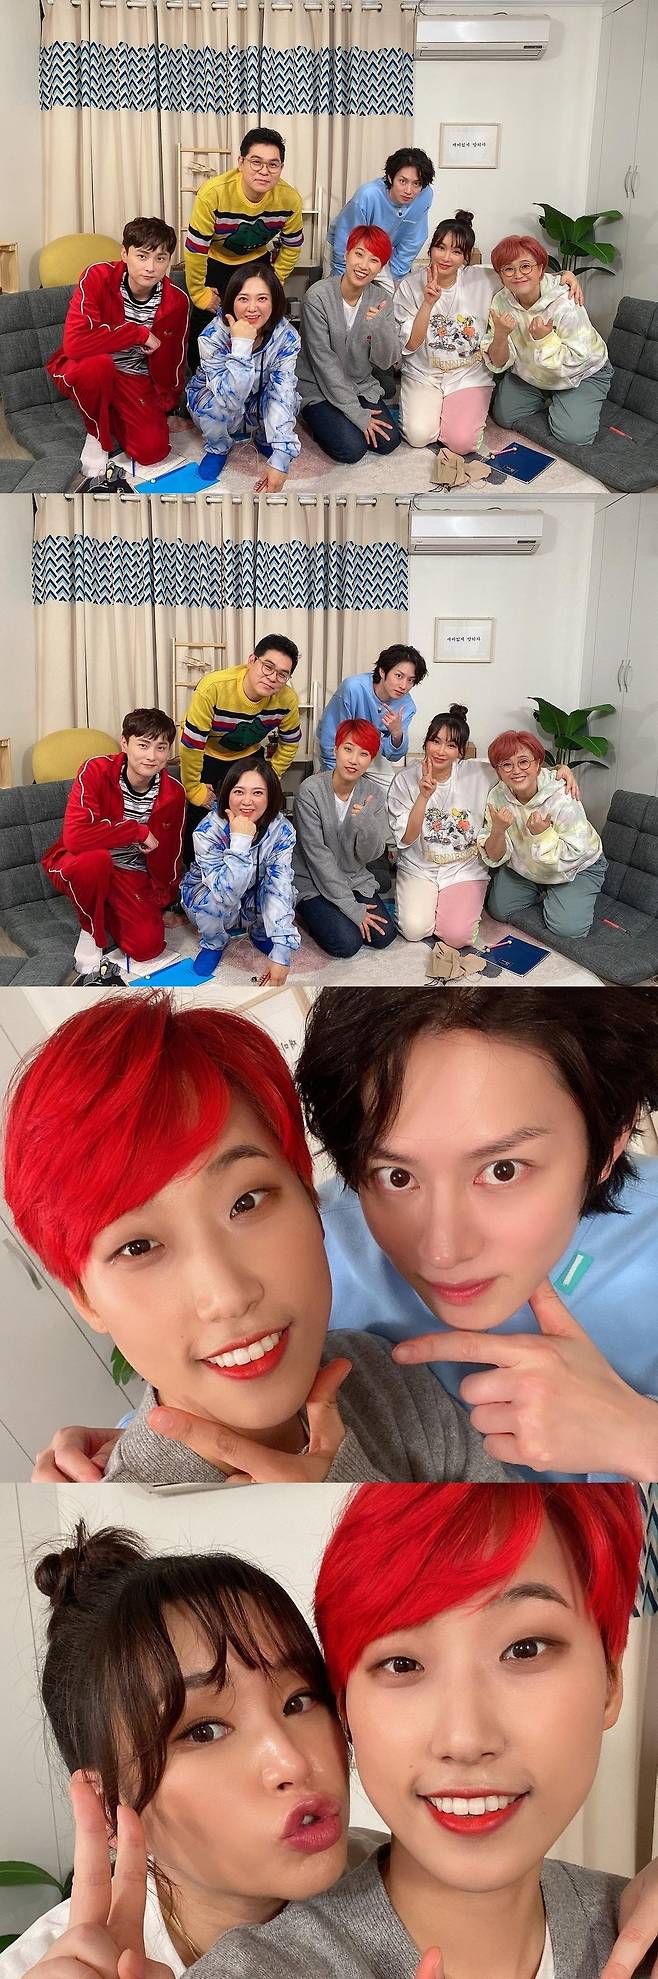 Jaejae, a senior (Celebrity+General), released a photo of KBS2s Problem Child in House.Jaejae wrote on his personal Instagram account on January 19, Problem Child in House was so fun, the place that was hot and warm ... just warm.Yoon Jung Sister and special MC who came together, Eun Eun Sister Yongman Uncle Sook Sister Kyunghoon all posted the picture with the article The best #Problem Child in House #oxmuna # Public Broadcasting.In the released photo, Jaejae is taking a certified photo with the cast of Problem Child in House.The netizens responded that Jaejae Sister and Song Sook are so good and I missed it. I should go back.